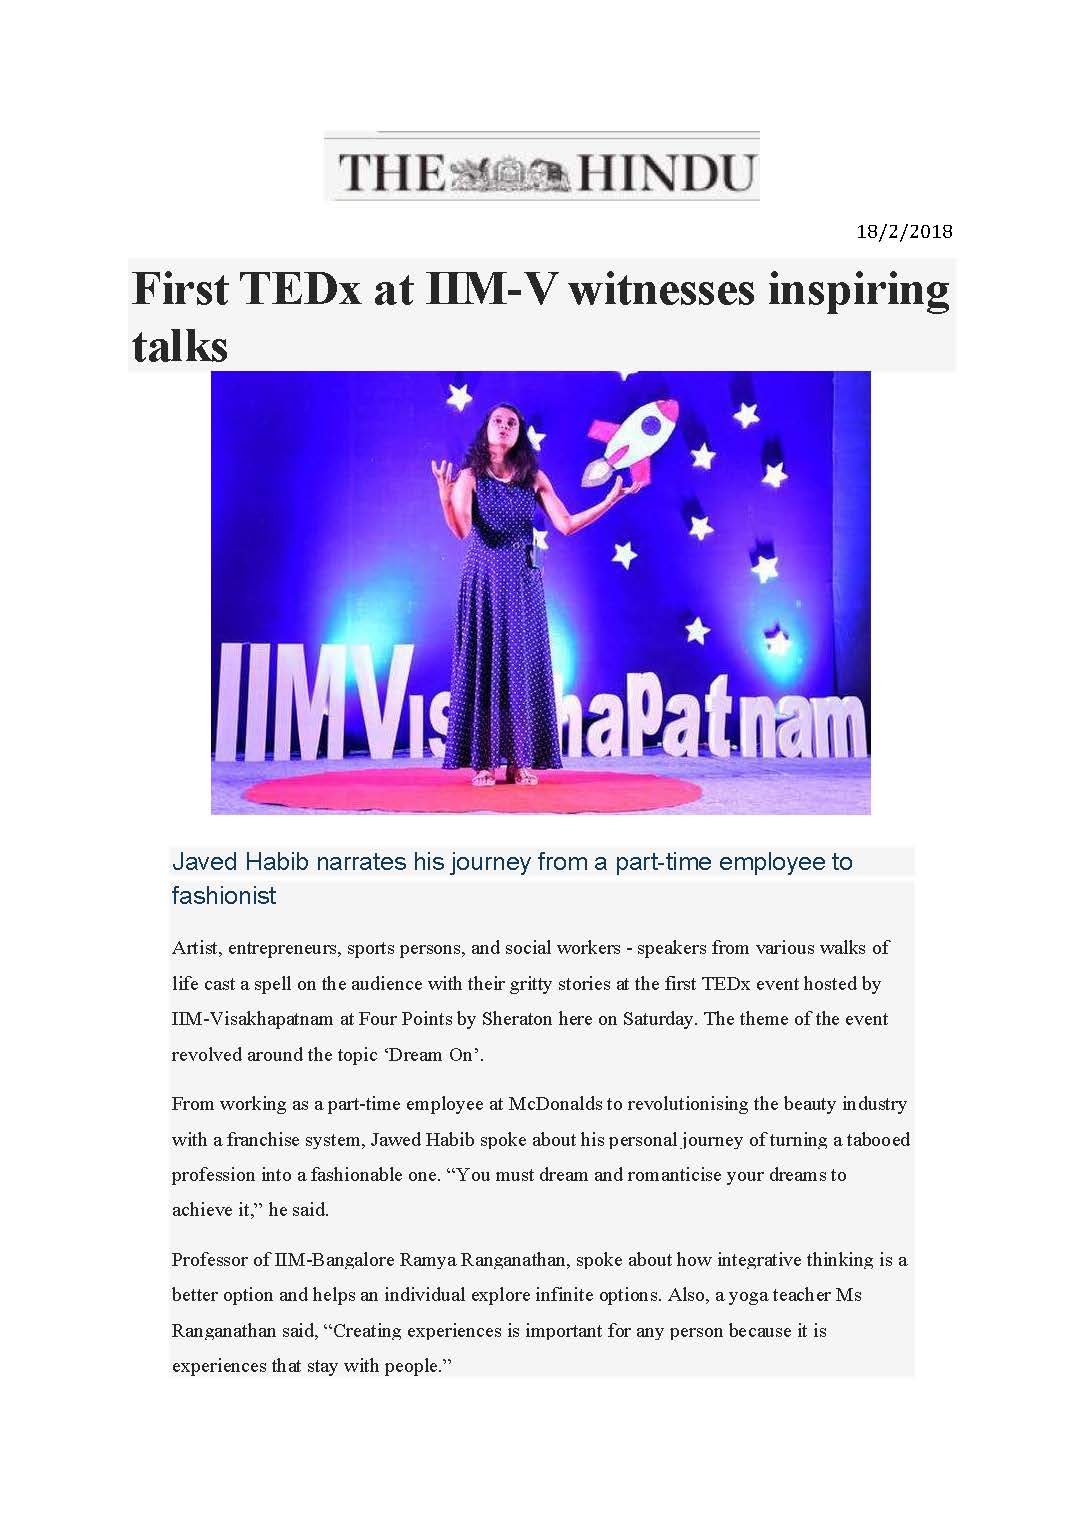 First-ever TEDx event held at IIM Visakhapatnam - 18.02.2018